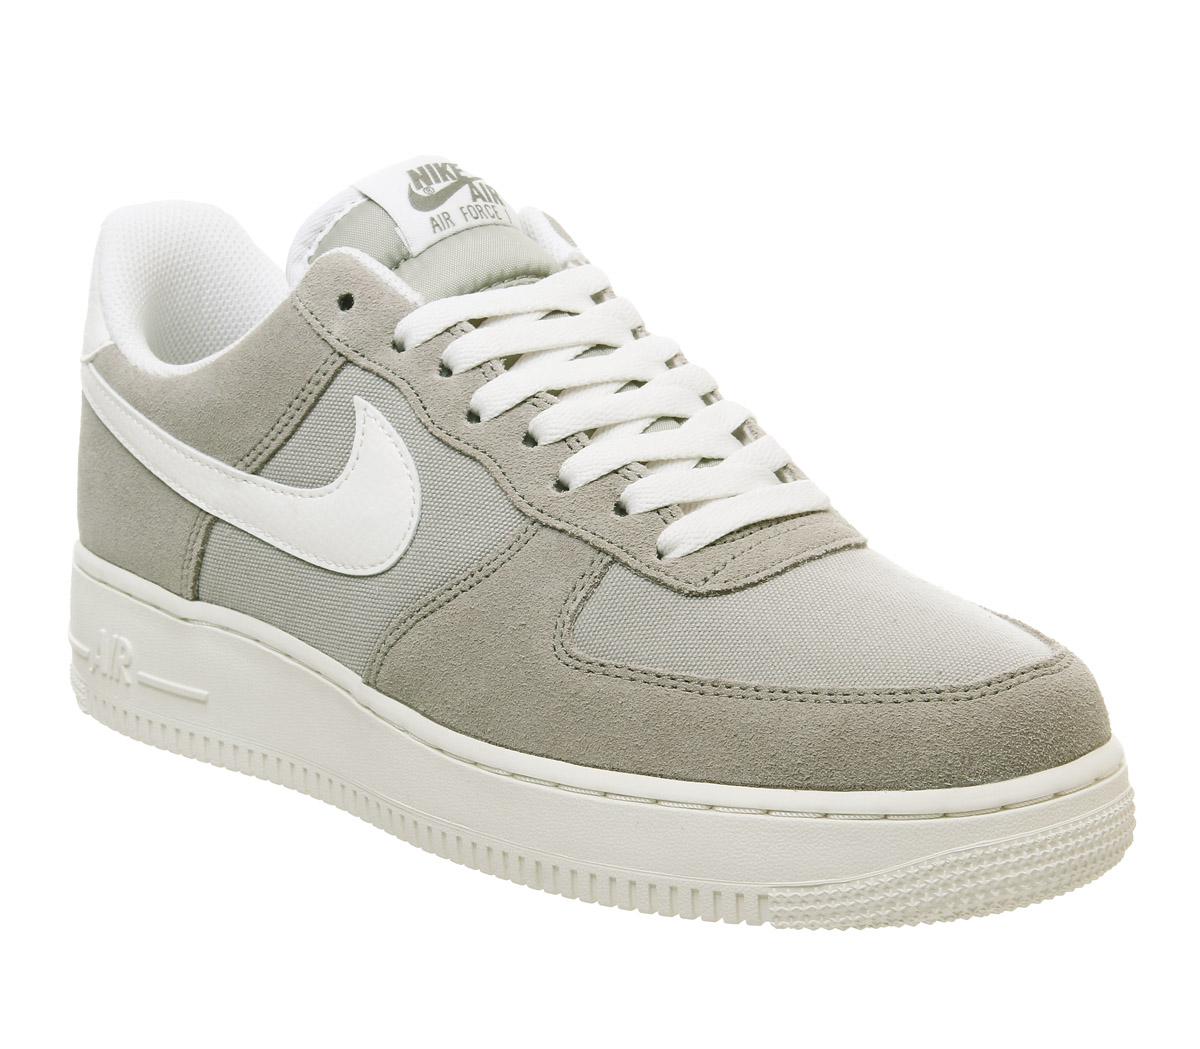 classic air force ones